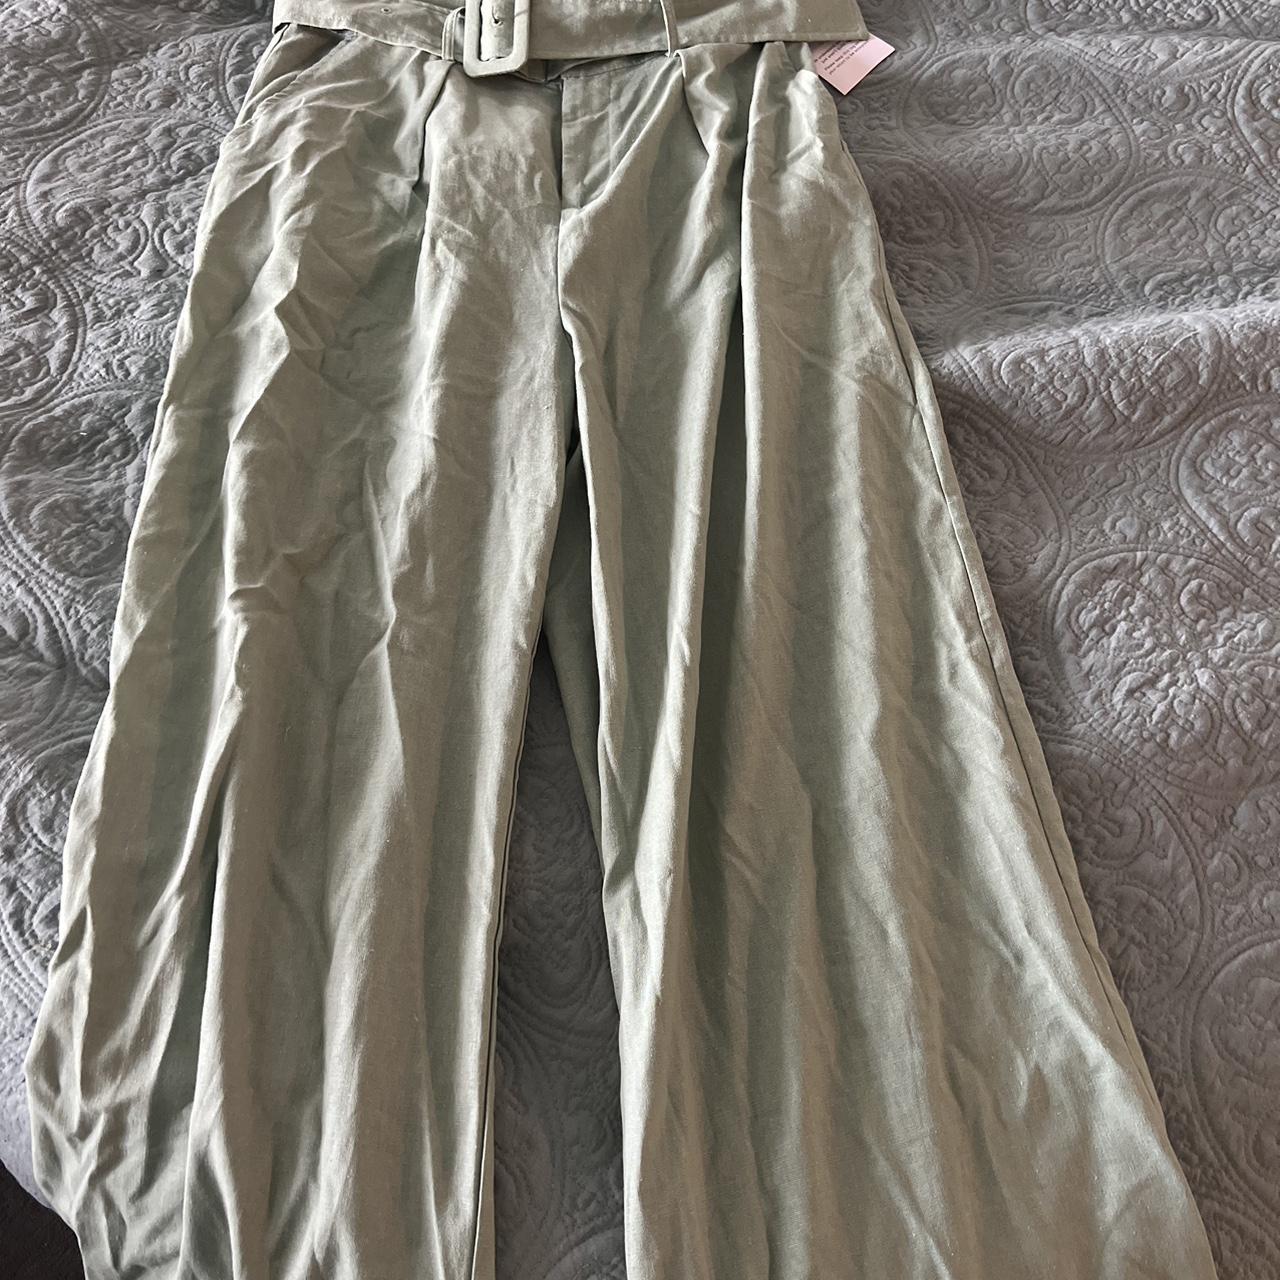 Calli pants new with tags - Depop